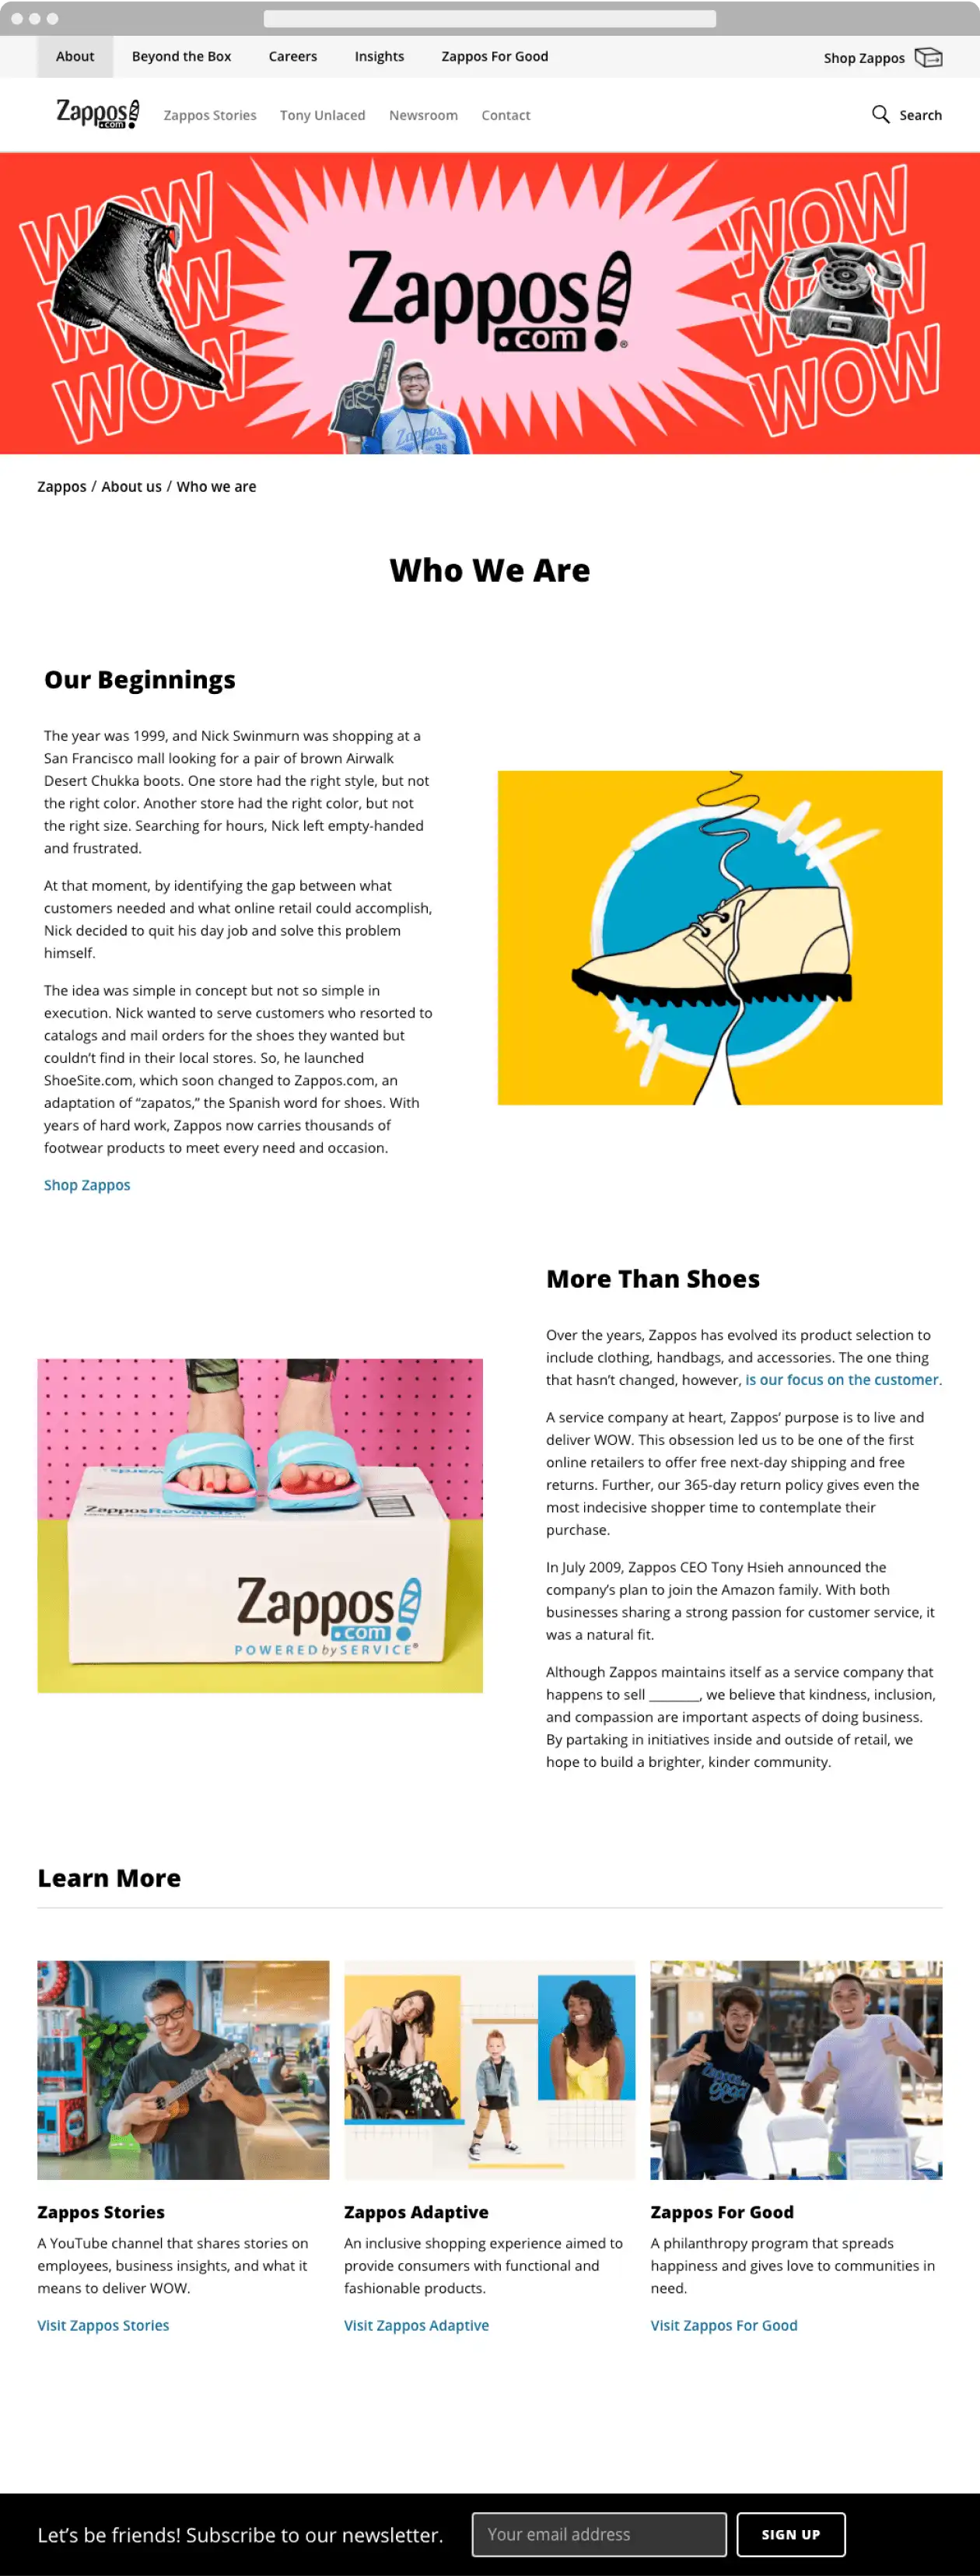 Zappos company on the About us subpage is building an image of being a friend